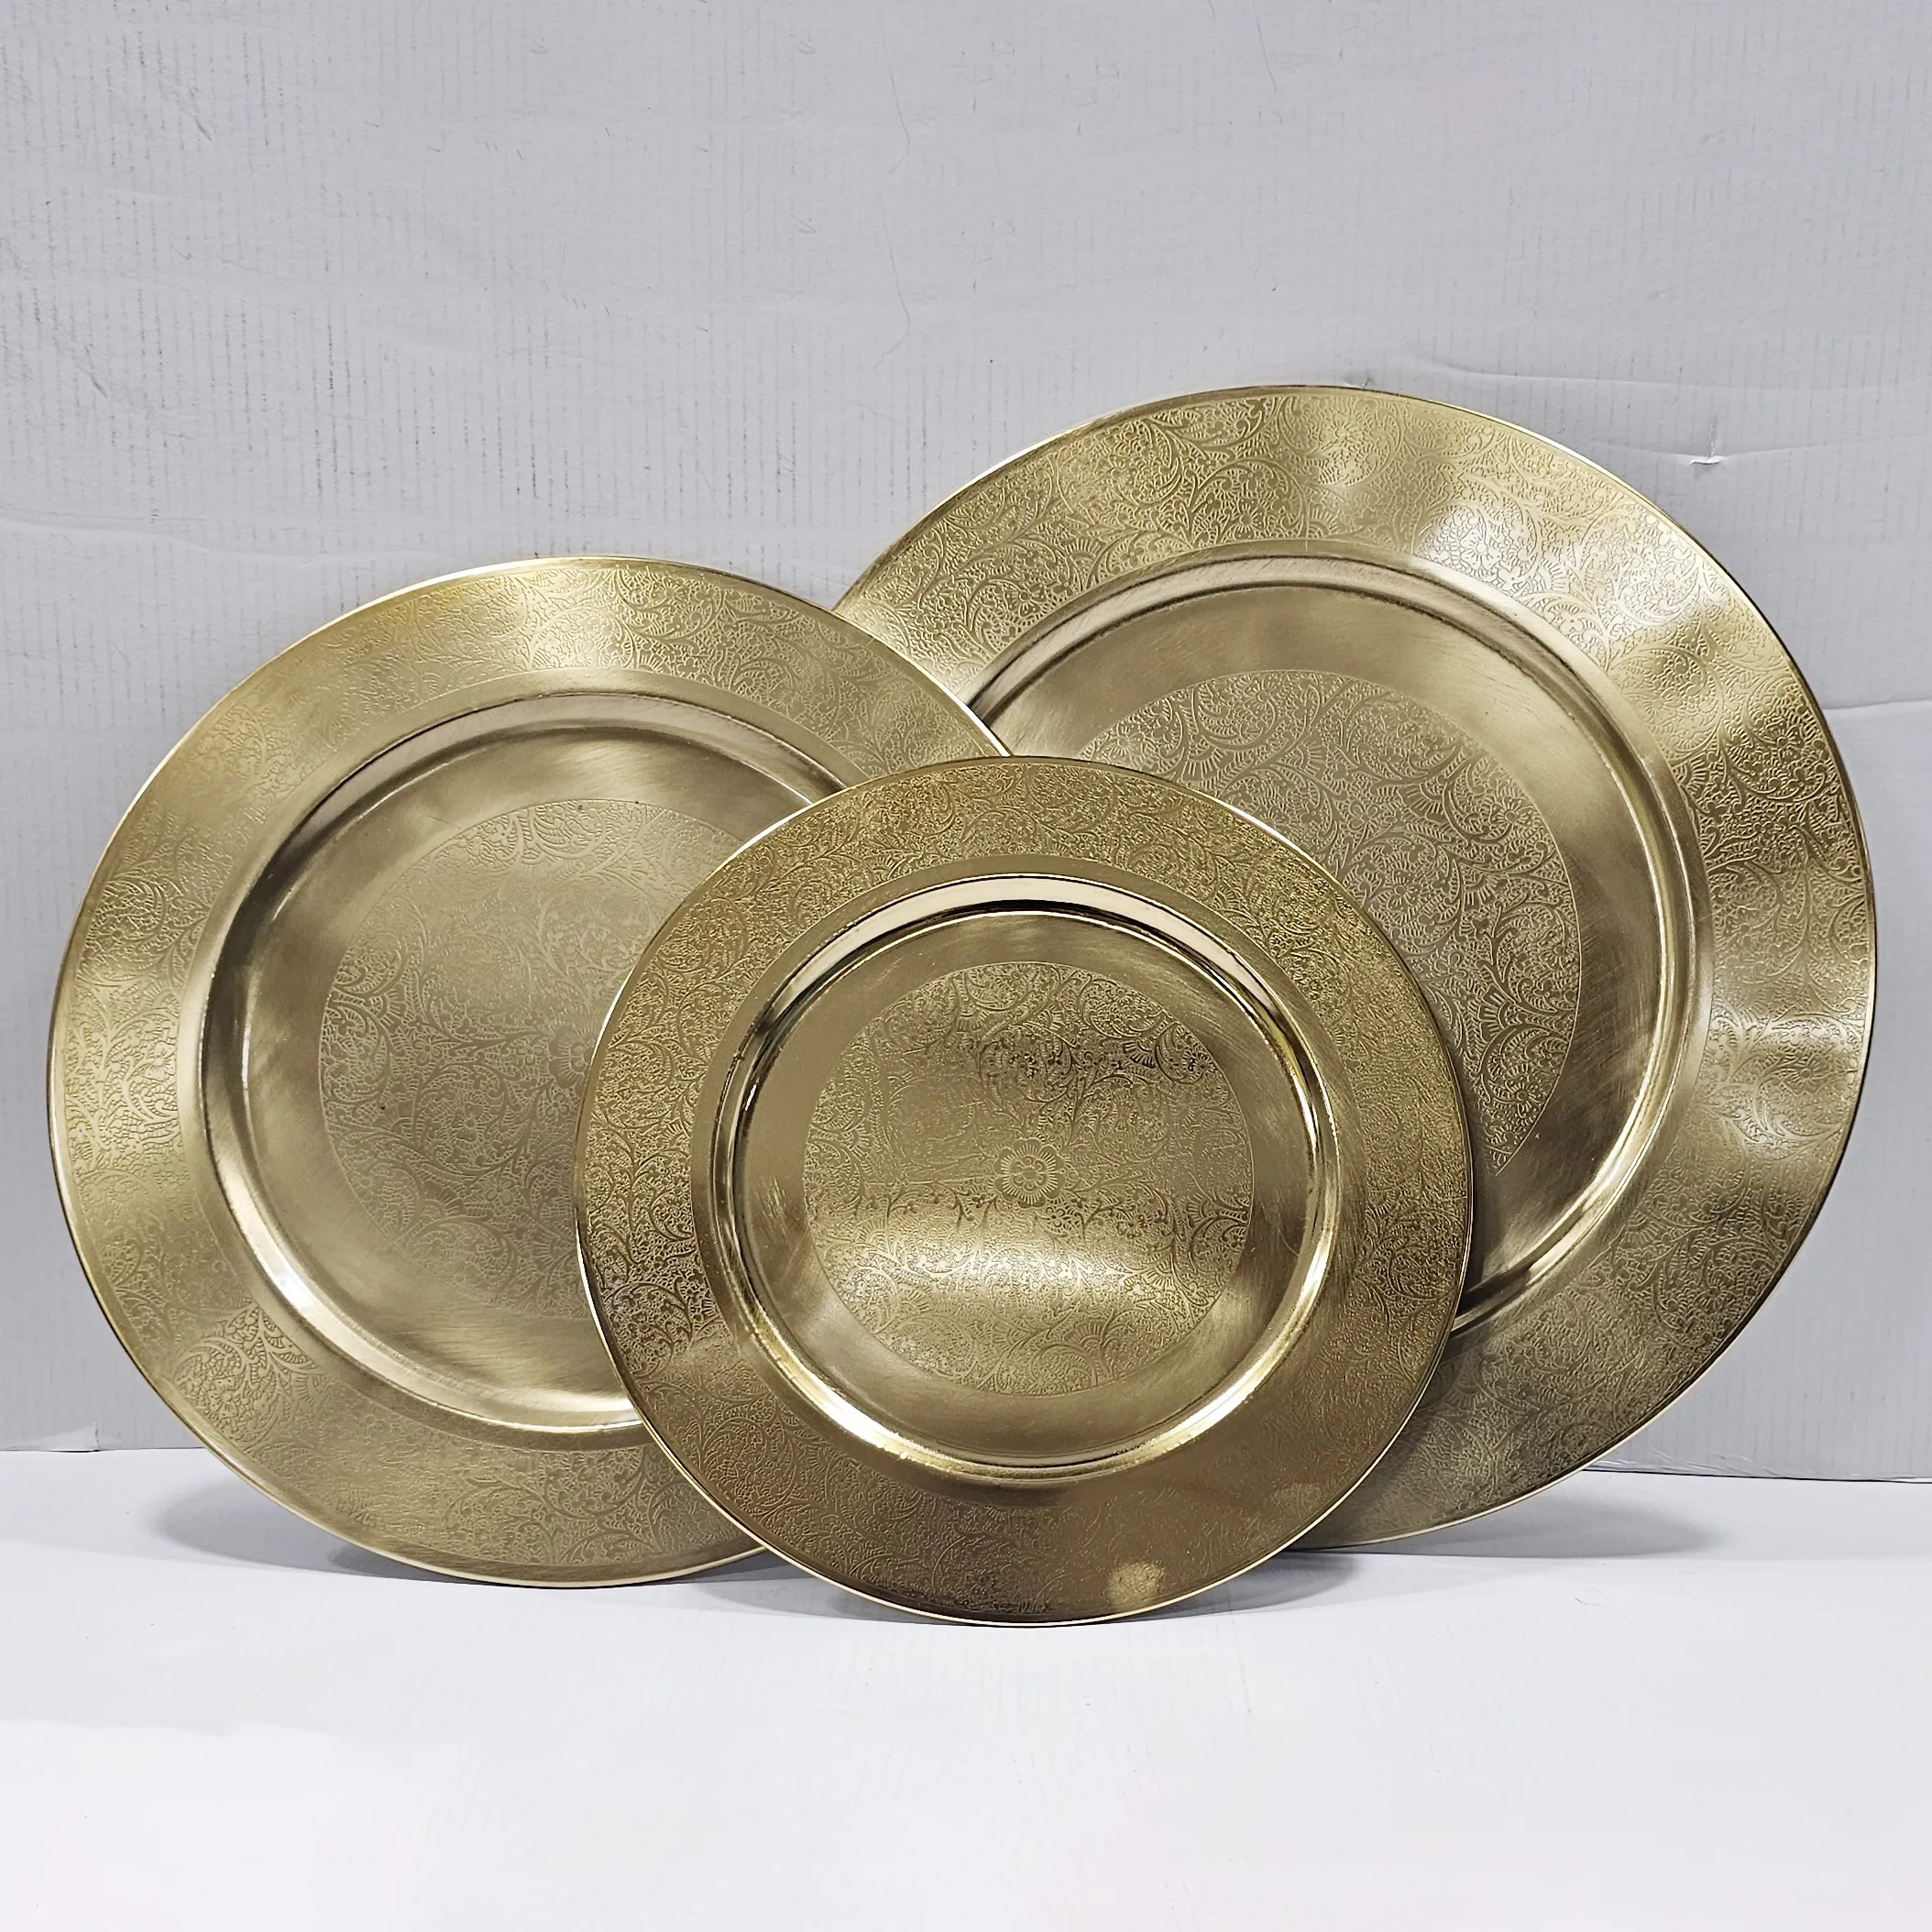 Hot selling Kitchen ware Gold set of three plates Dinnerware Tableware Modern Luxury Iron Dinner Set Bohemian Plate by Indian m